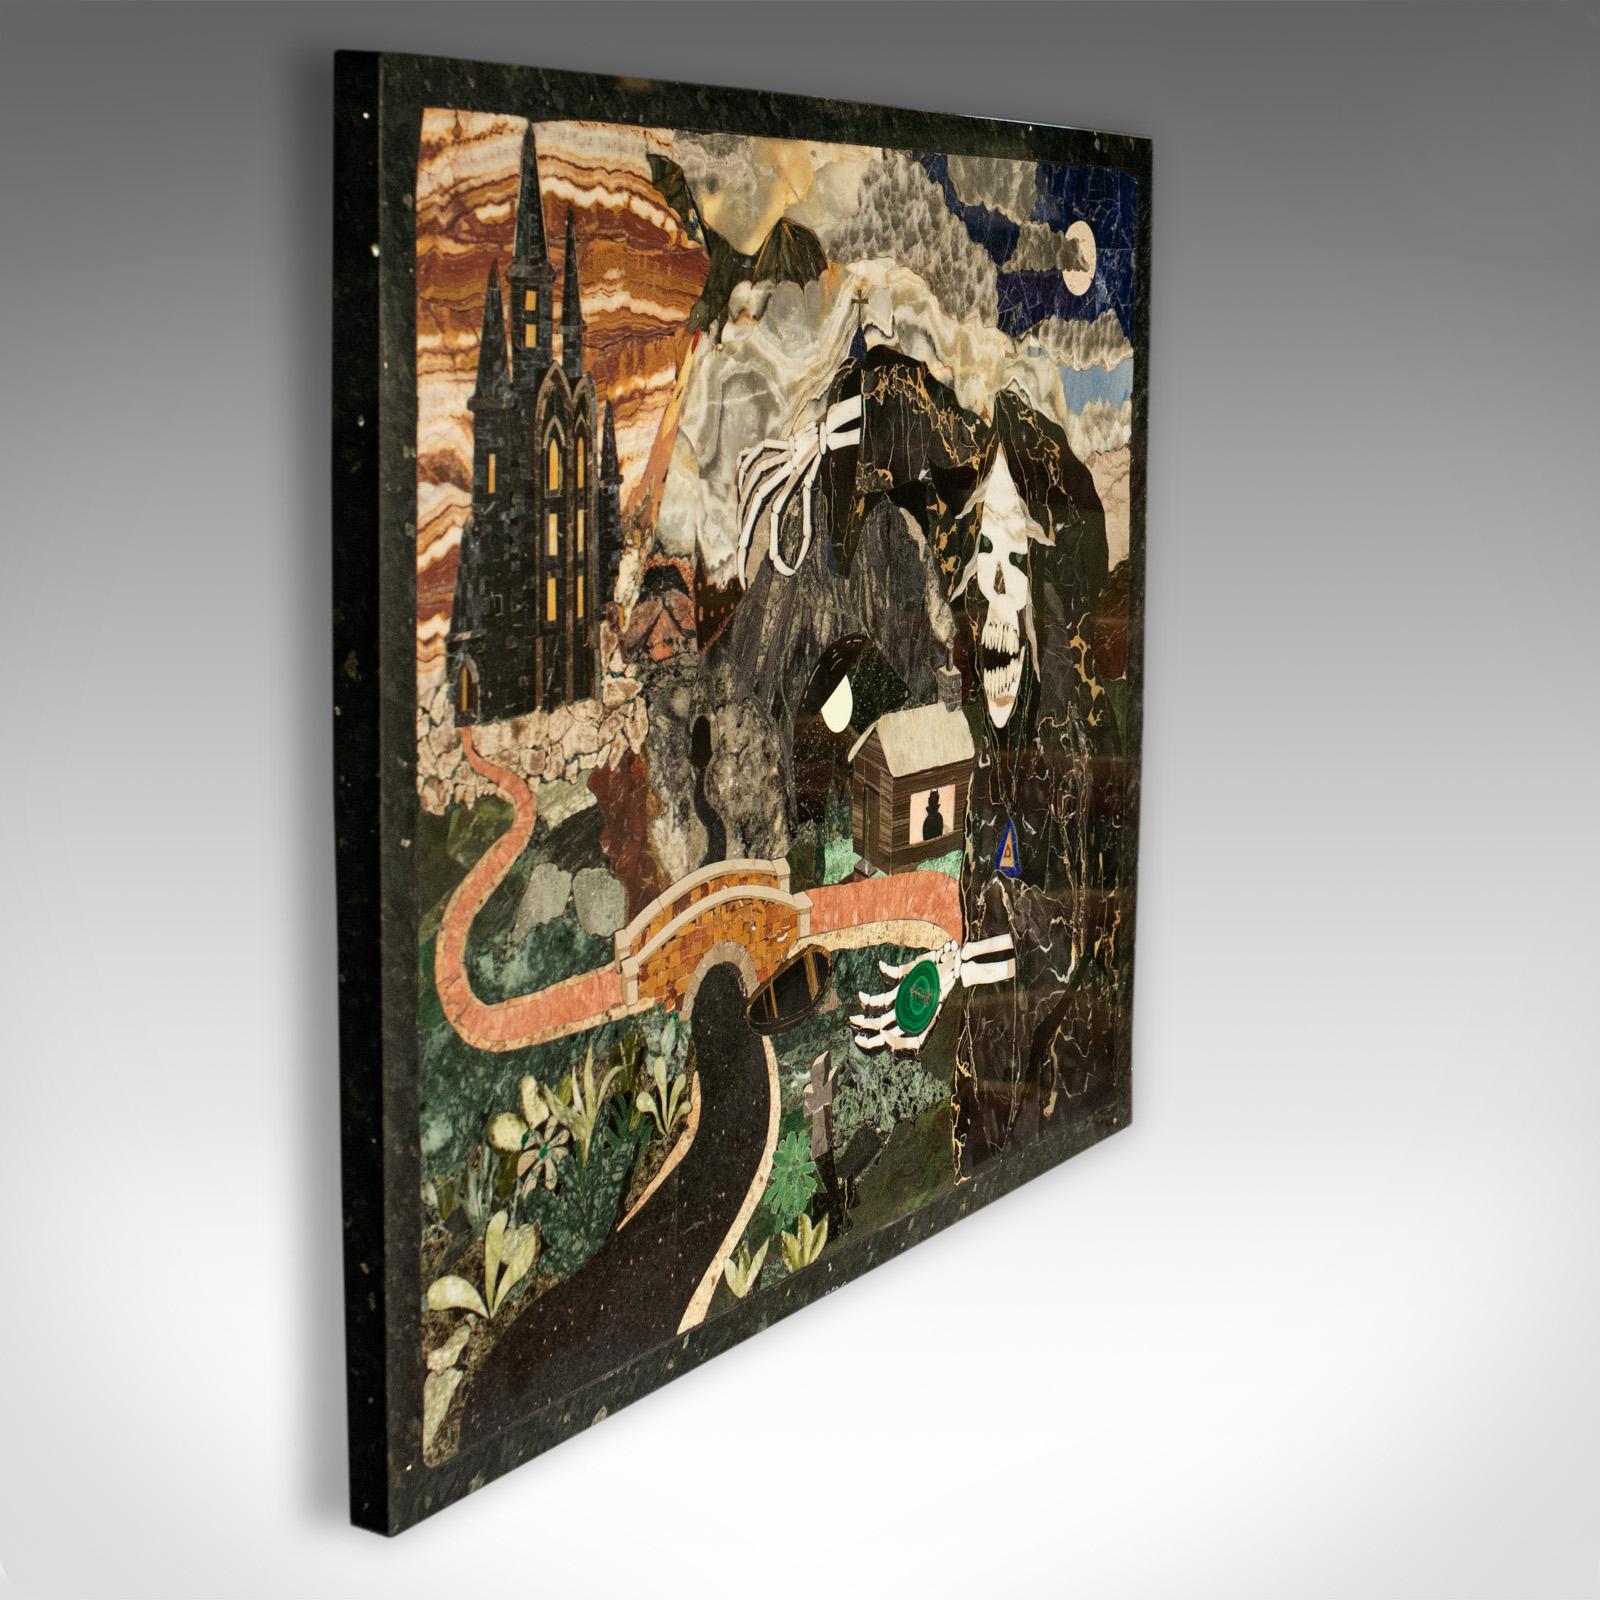 'The Fractured Hour' is a mosaic or Pietra Dura displaying a fantasy scene. An English, tigers eye and lapis lazuli et al marble and stone piece by renowned sculptural artist Dominic Hurley and dating to the 20th century.

Profusely detailed in an